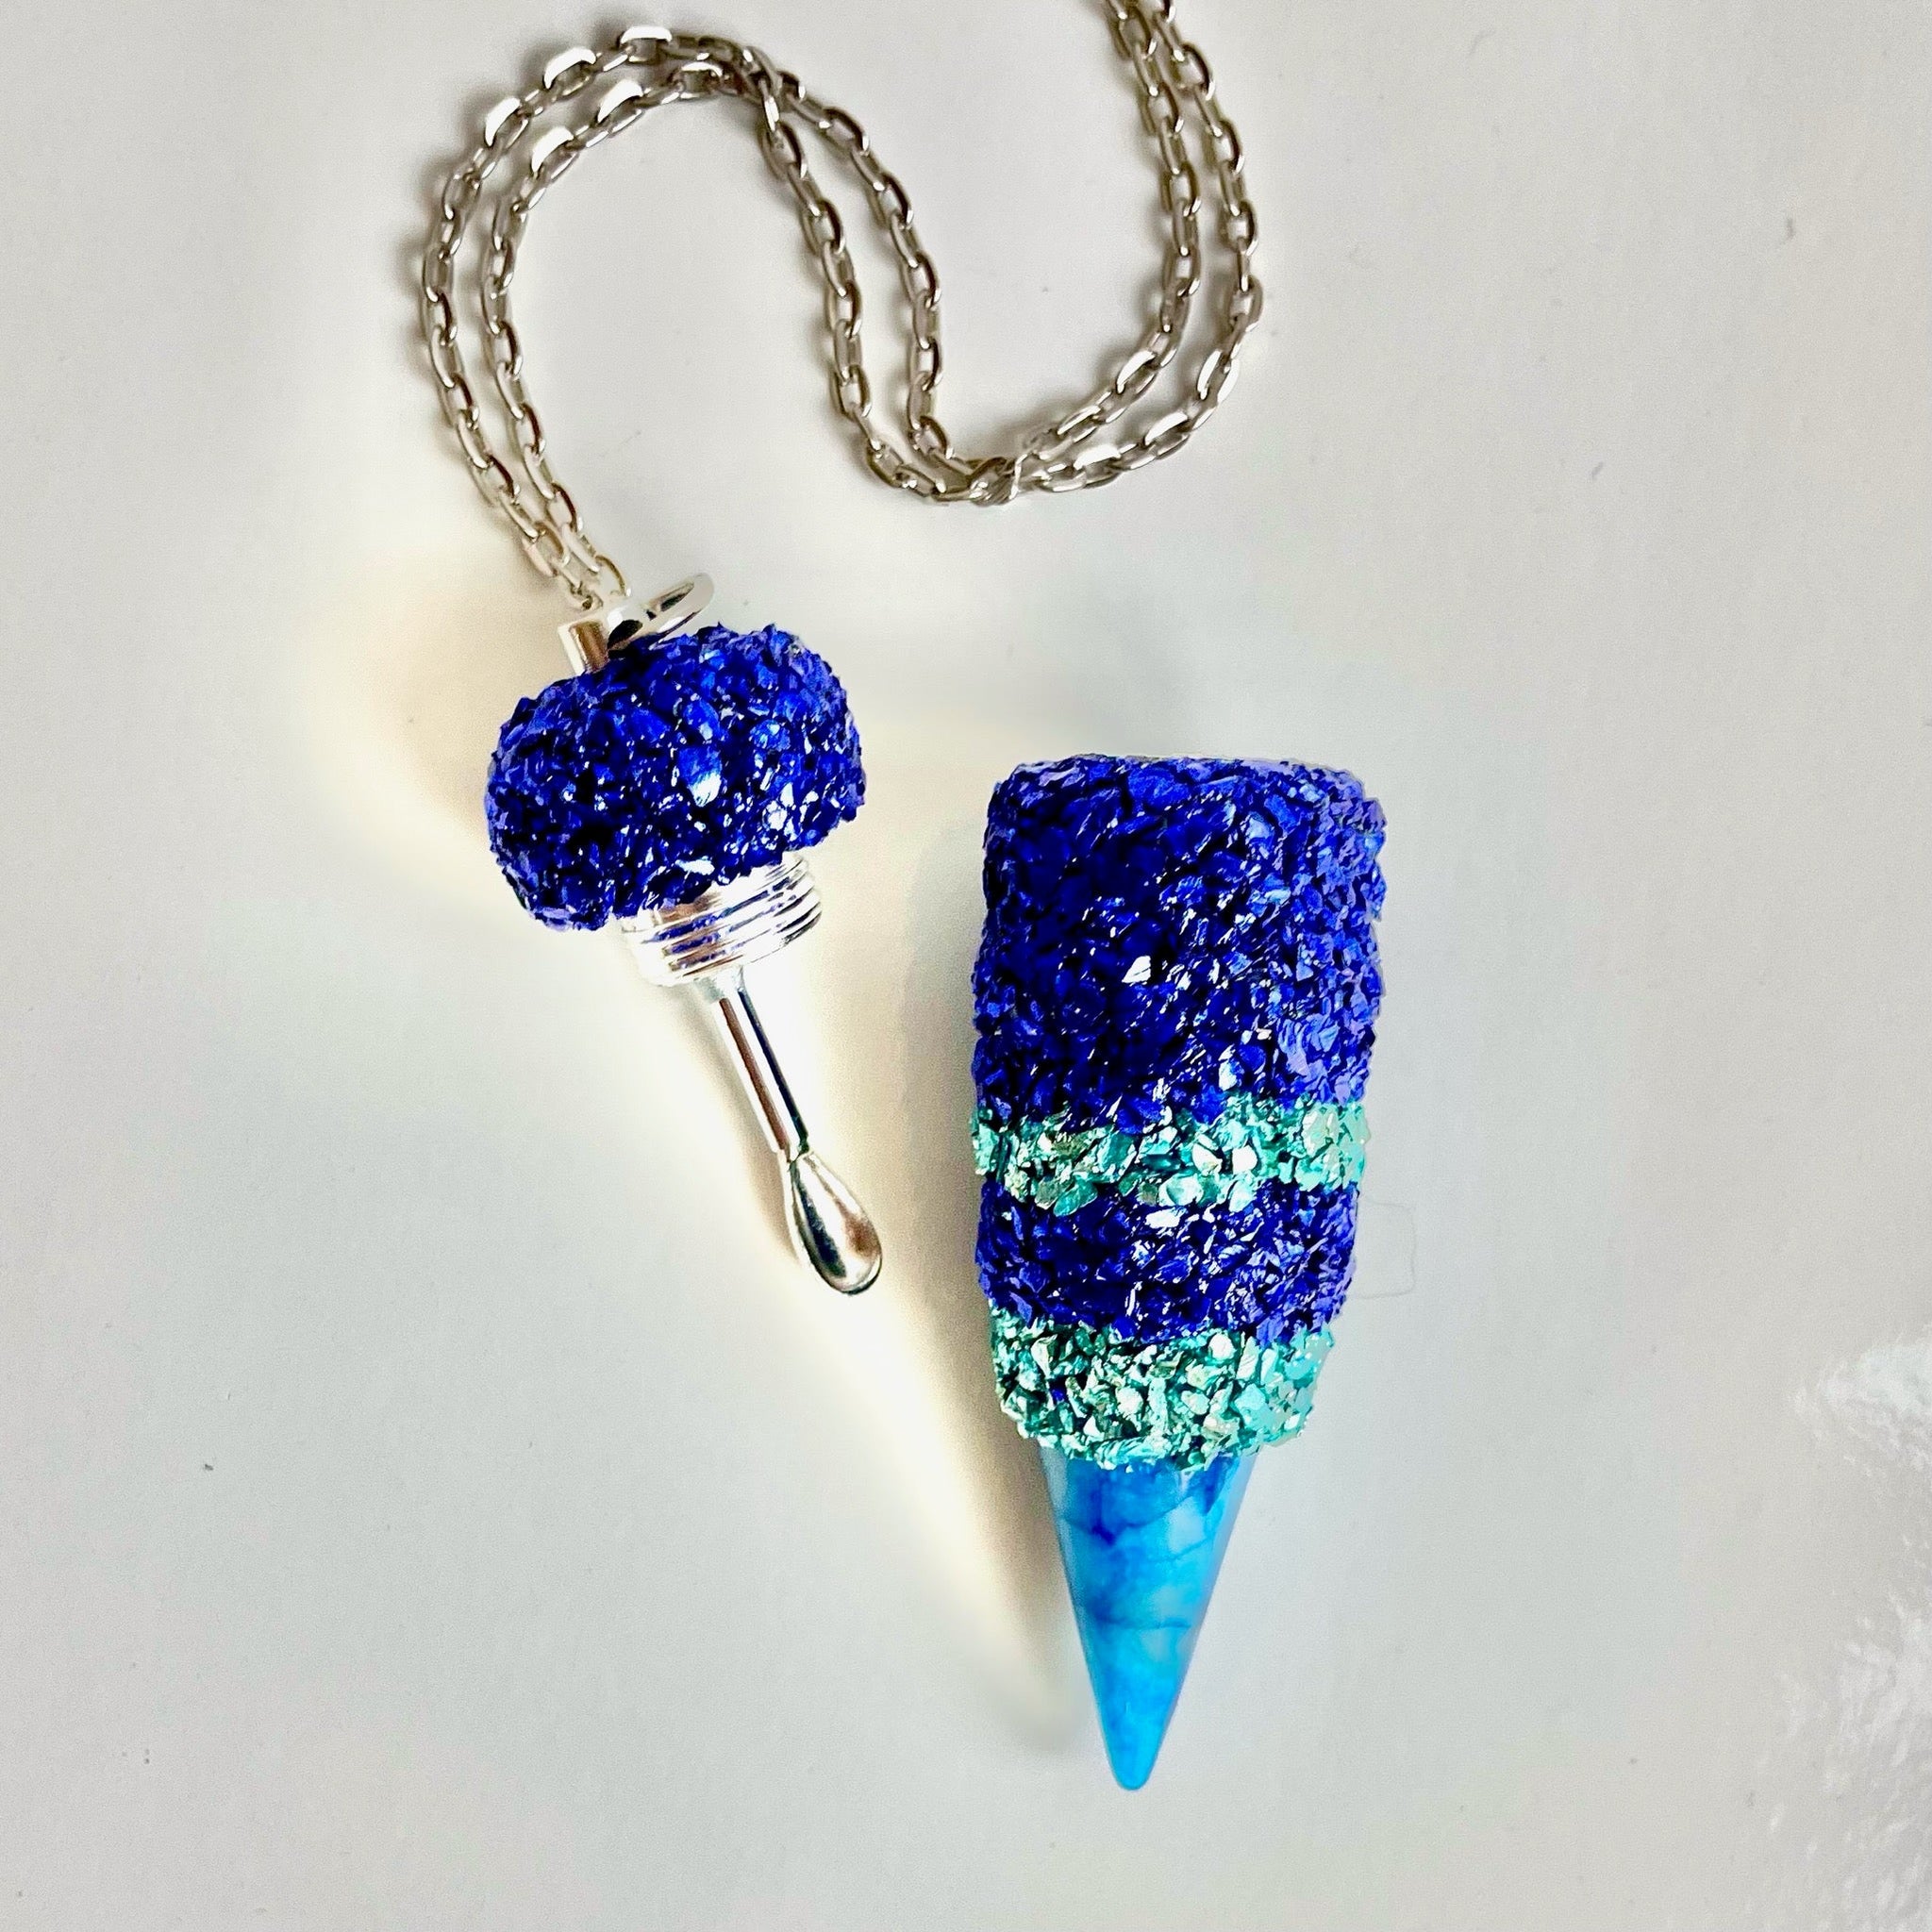 Bullet Stash Necklace with Telescopic Spoon